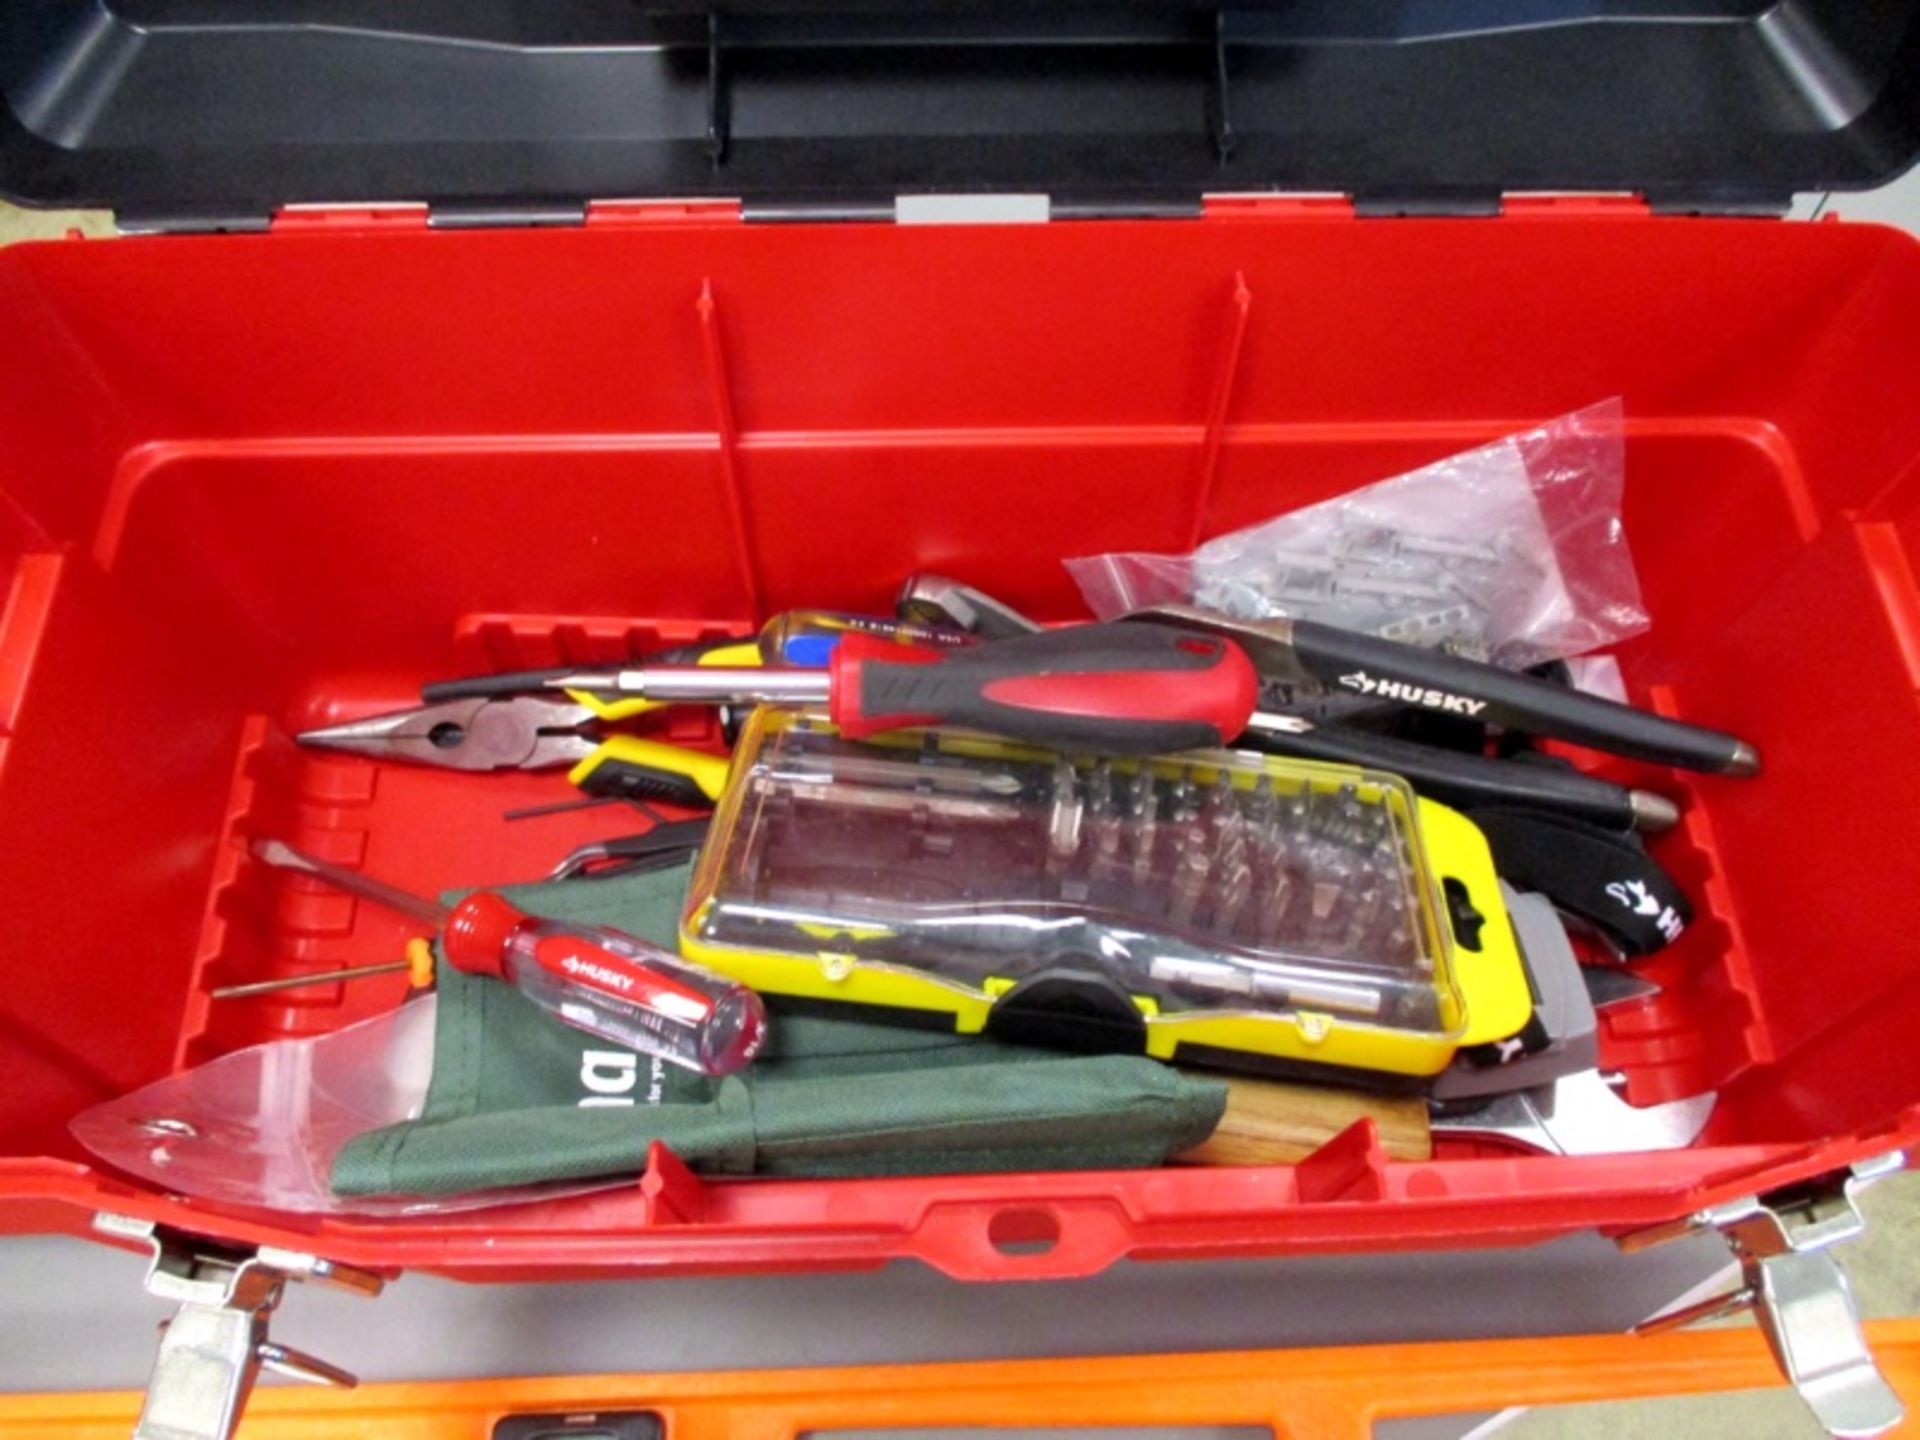 Stack-On Tool Box with tools and 4' leveler - Image 3 of 3